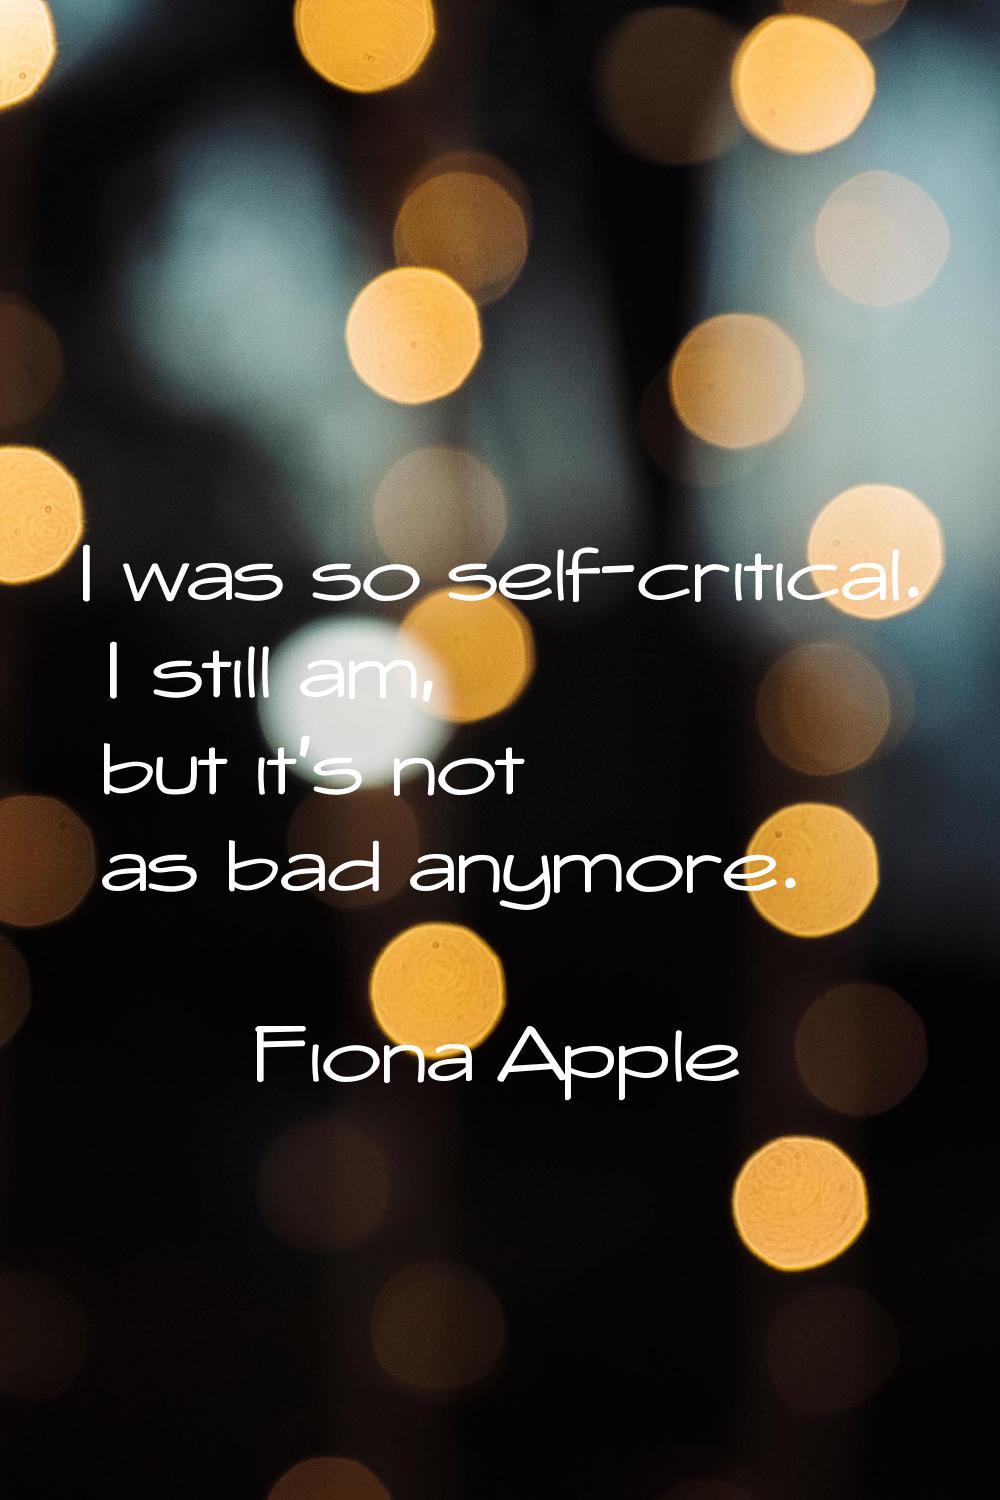 I was so self-critical. I still am, but it's not as bad anymore.